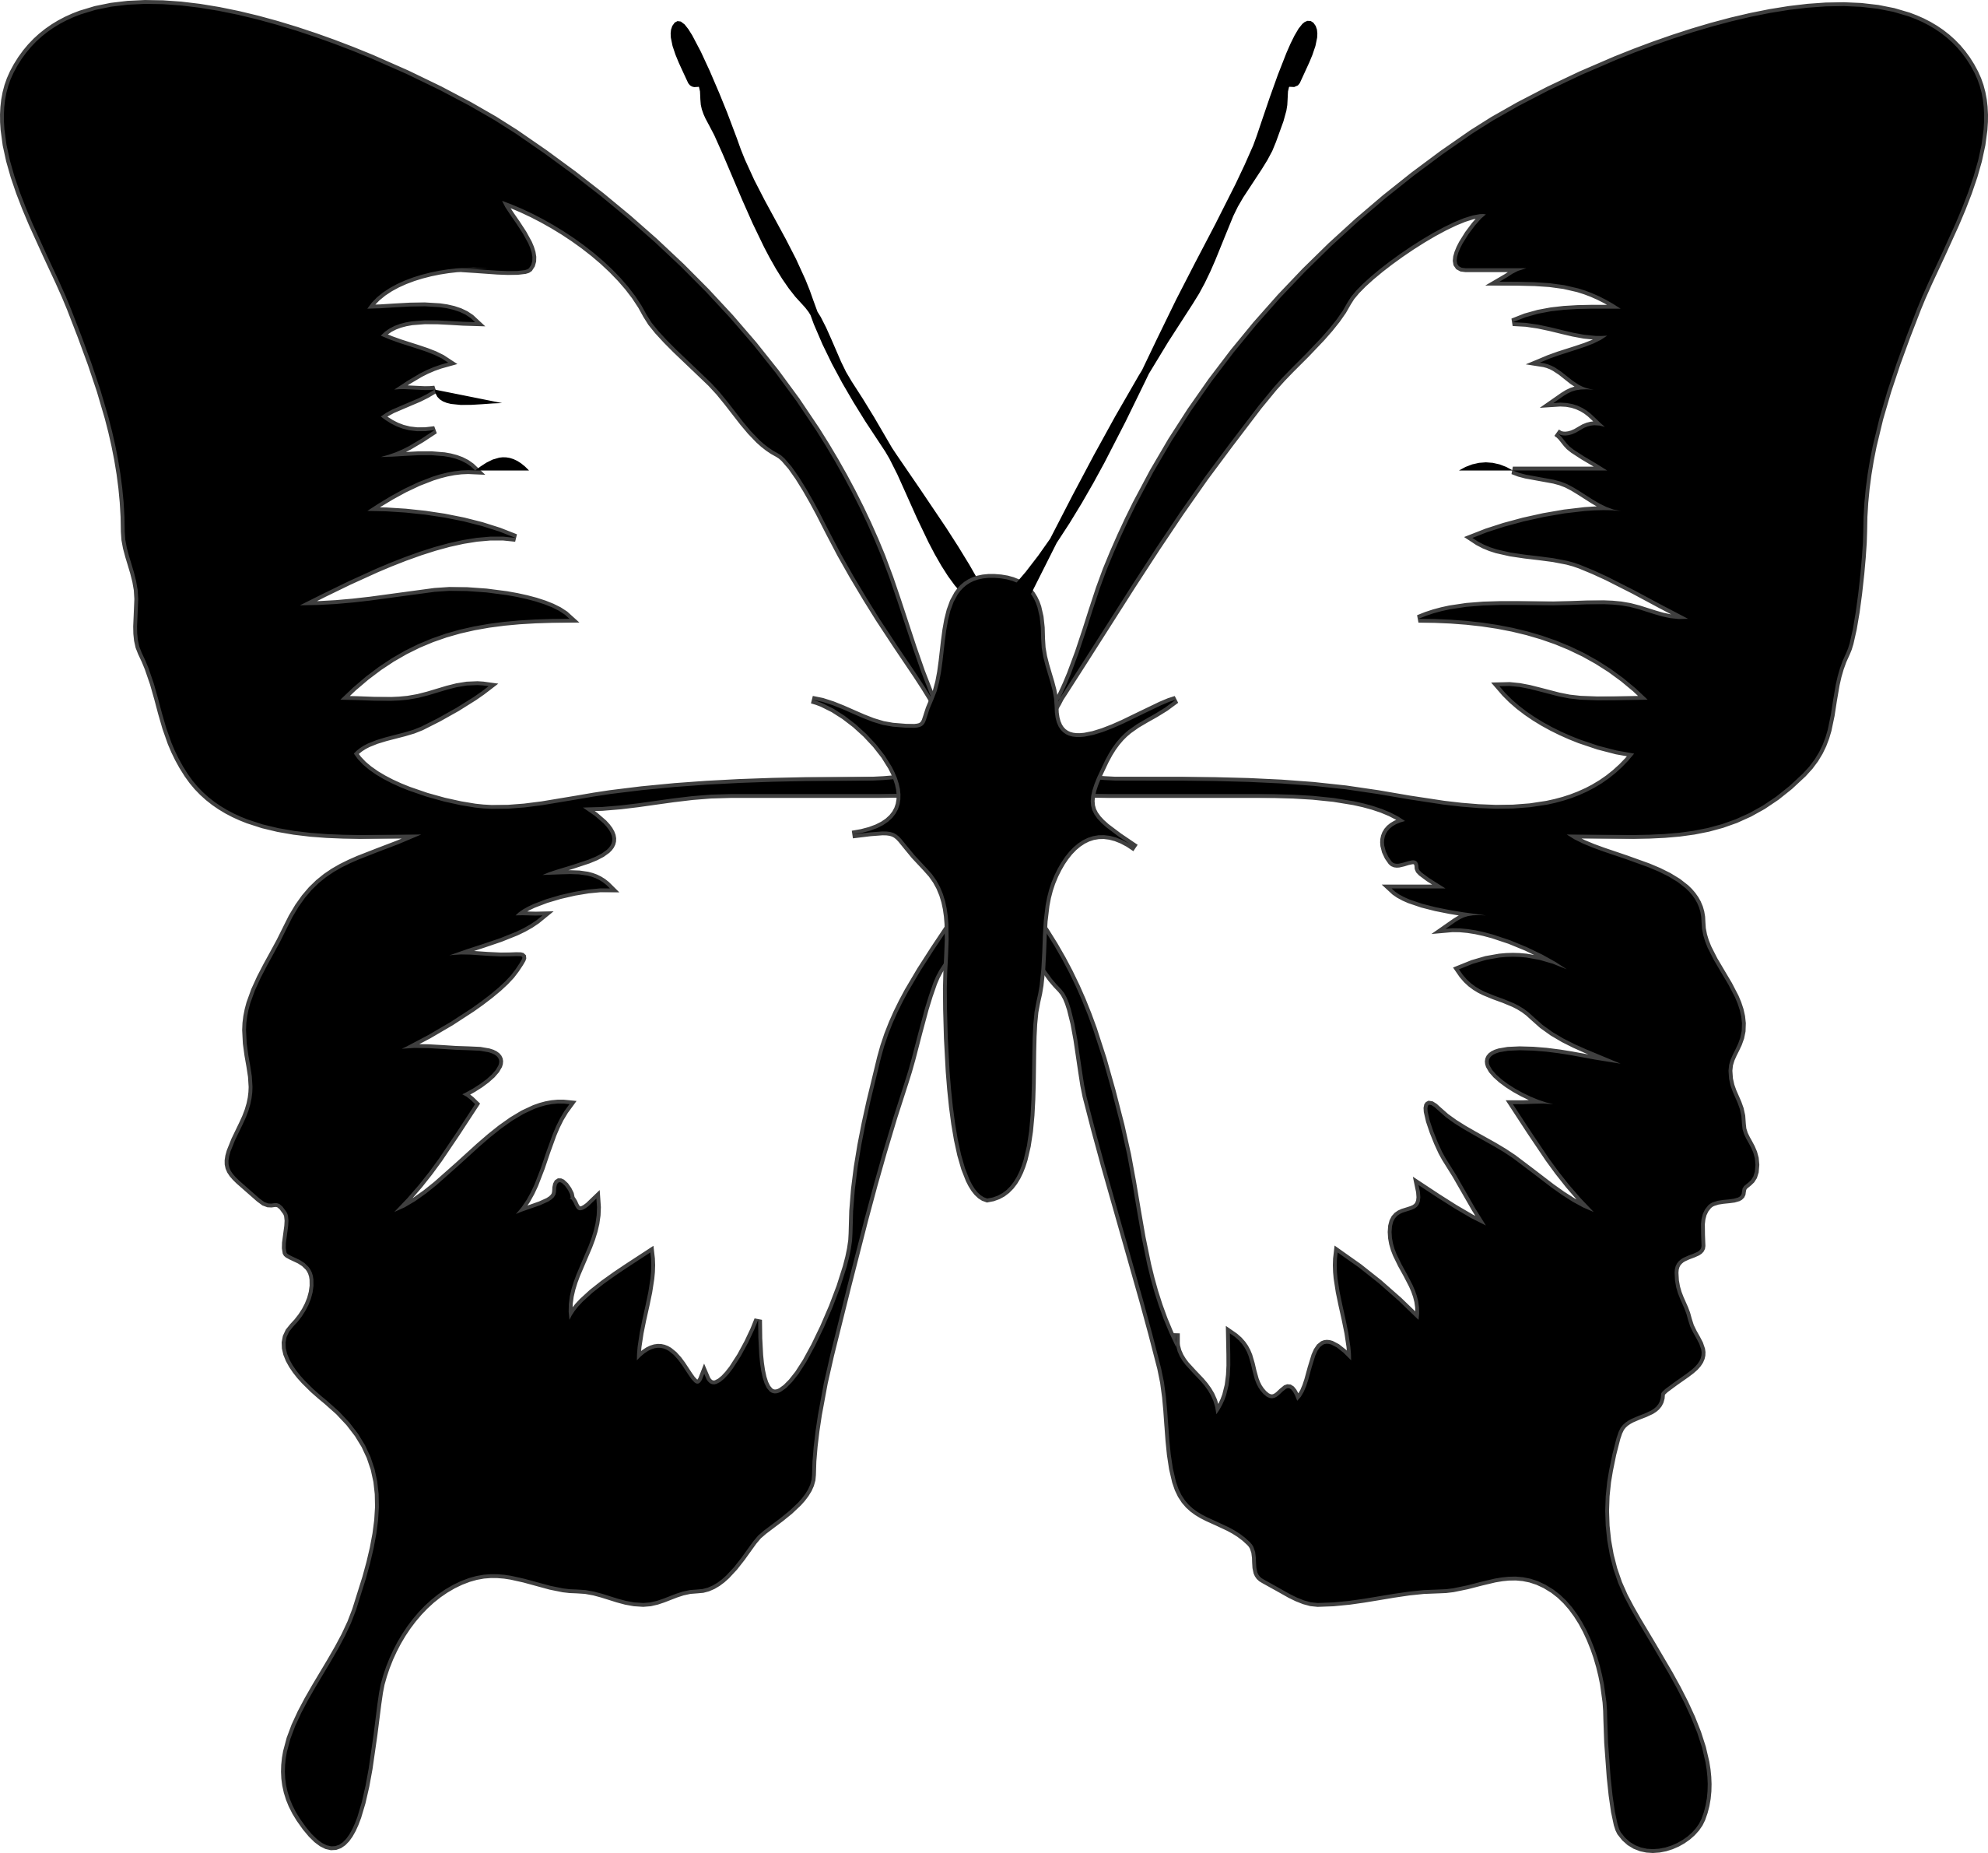 Insect clipart tribal, Insect tribal Transparent FREE for